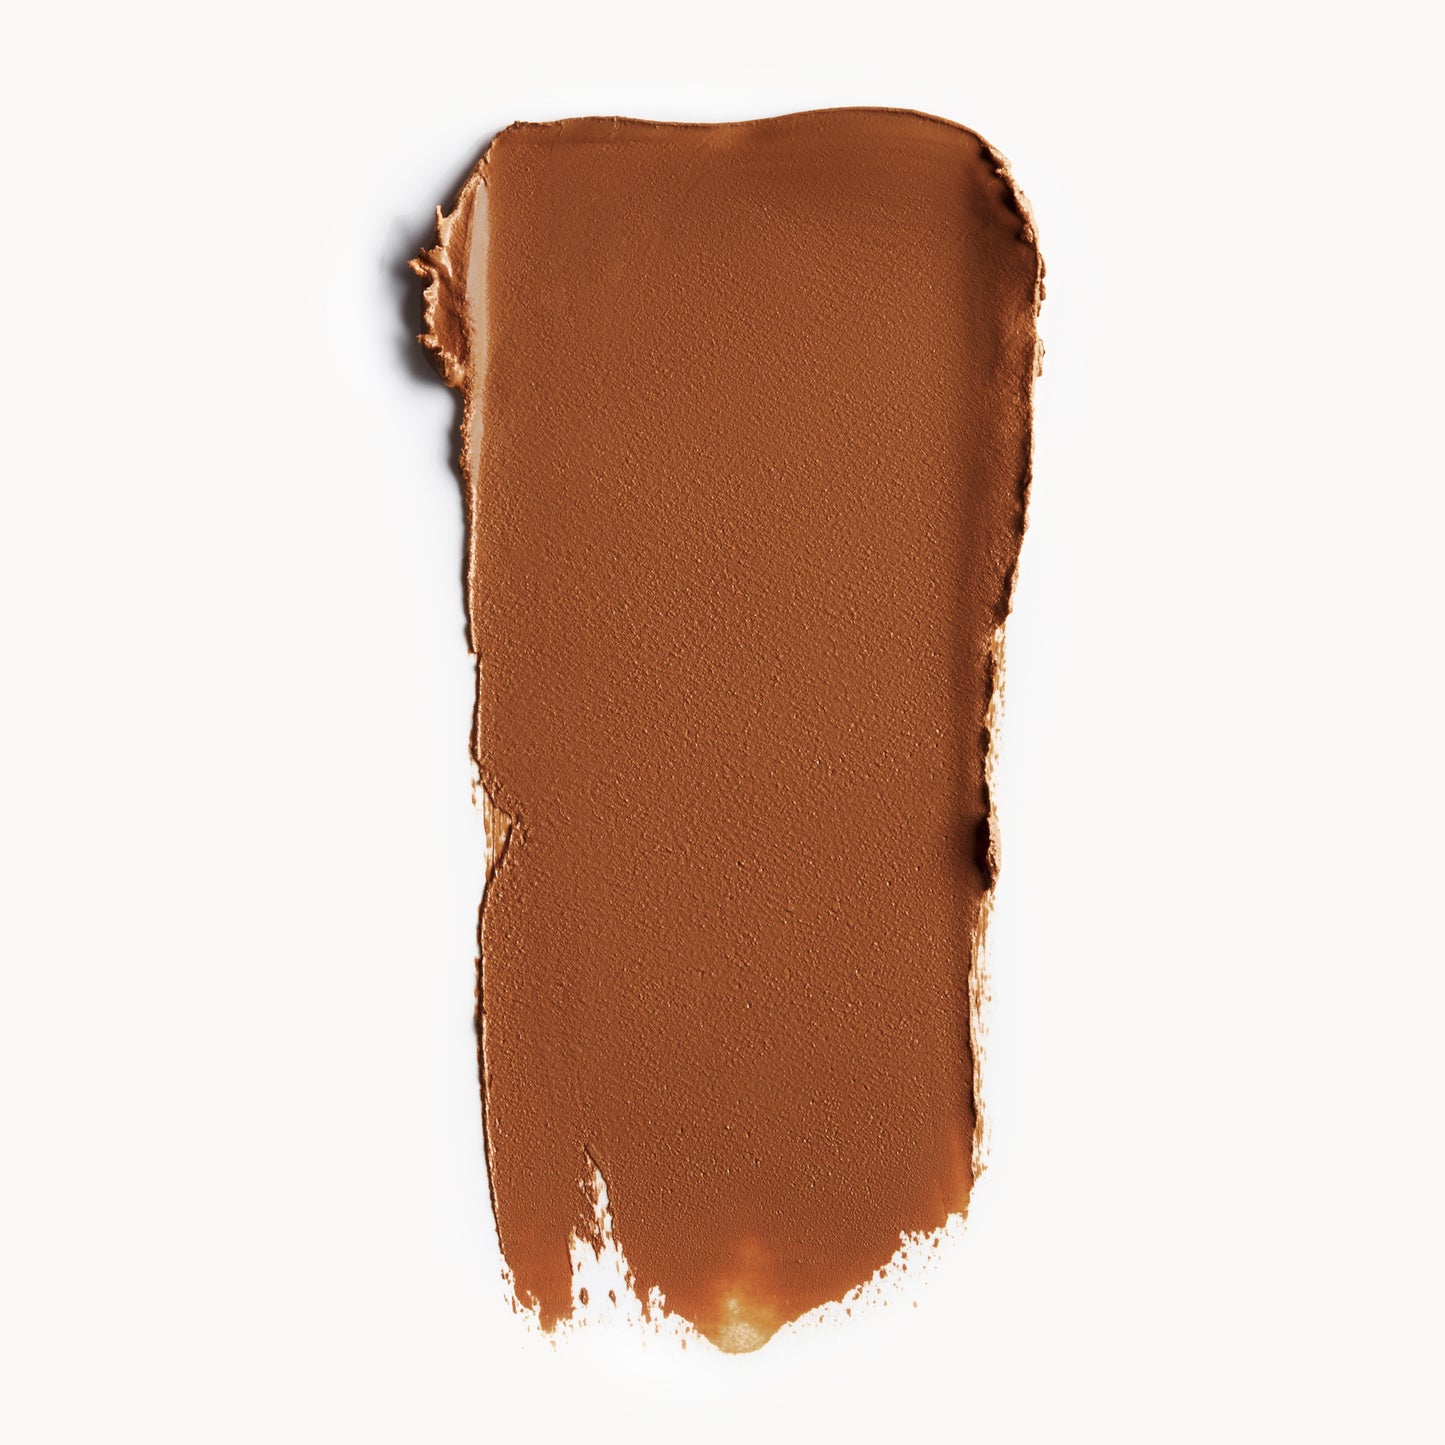 A wipe of deep, warm-toned cream foundation on a white background